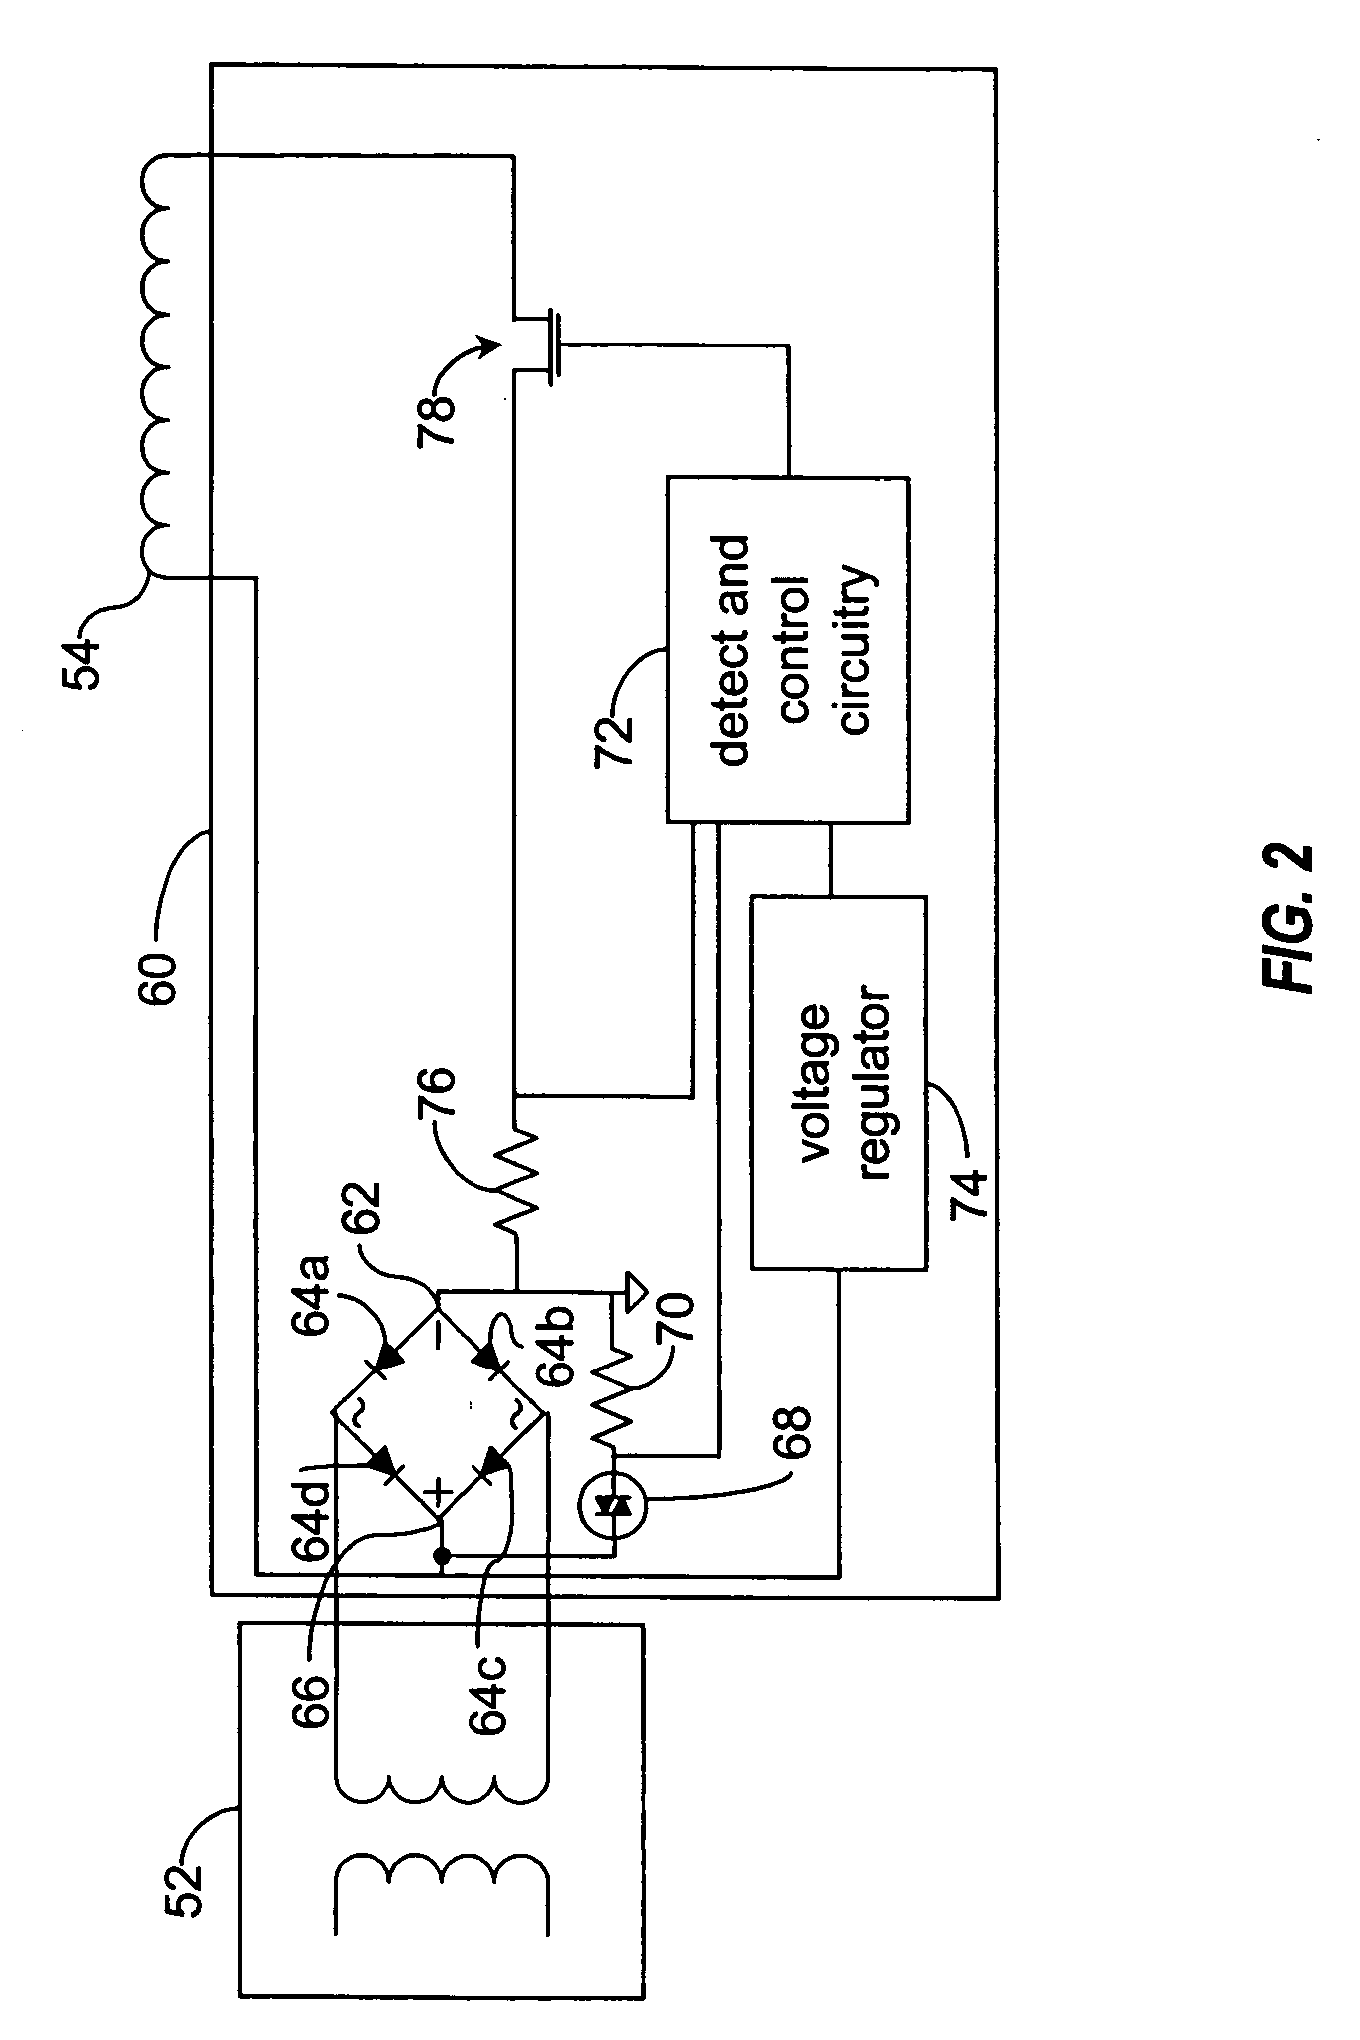 Electrical arcing protection circuit